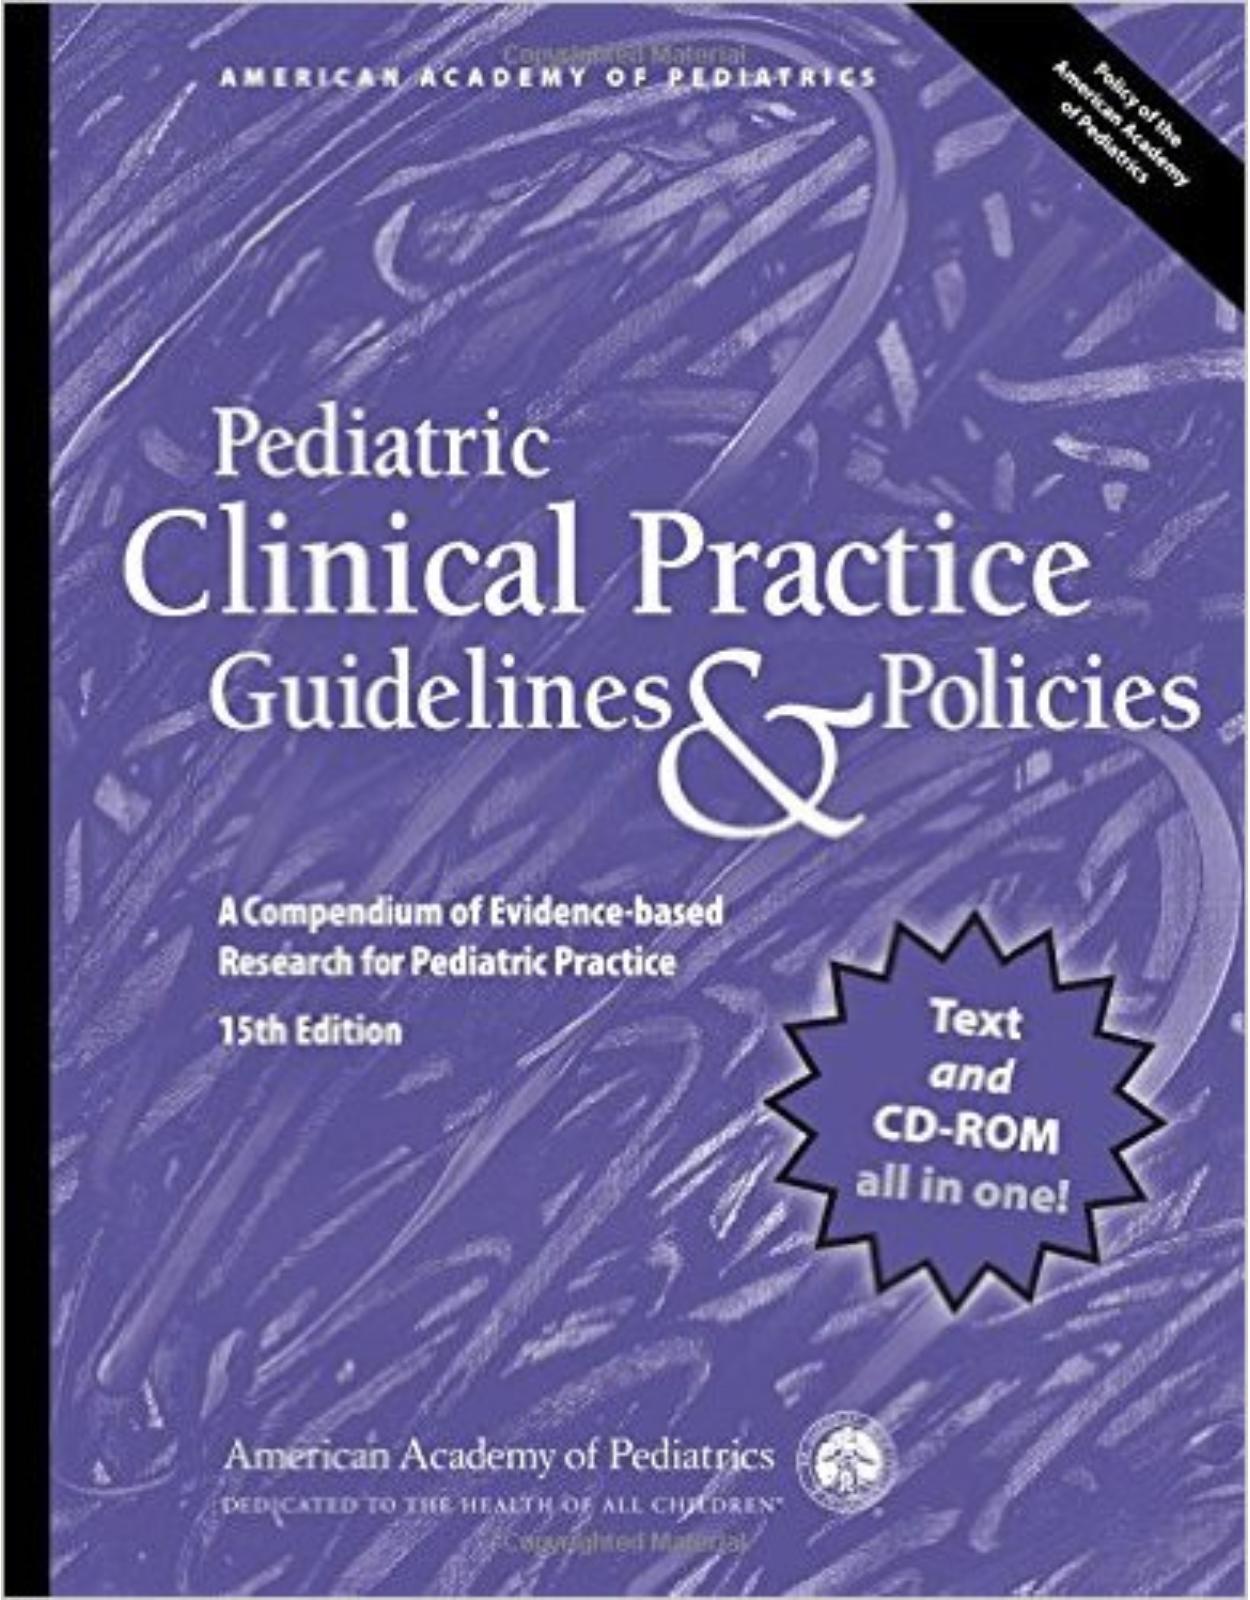 Pediatric Clinical Practice Guidelines & Policies, 15th Edition: A Compendium of Evidence-based Research for Pediatric Practice